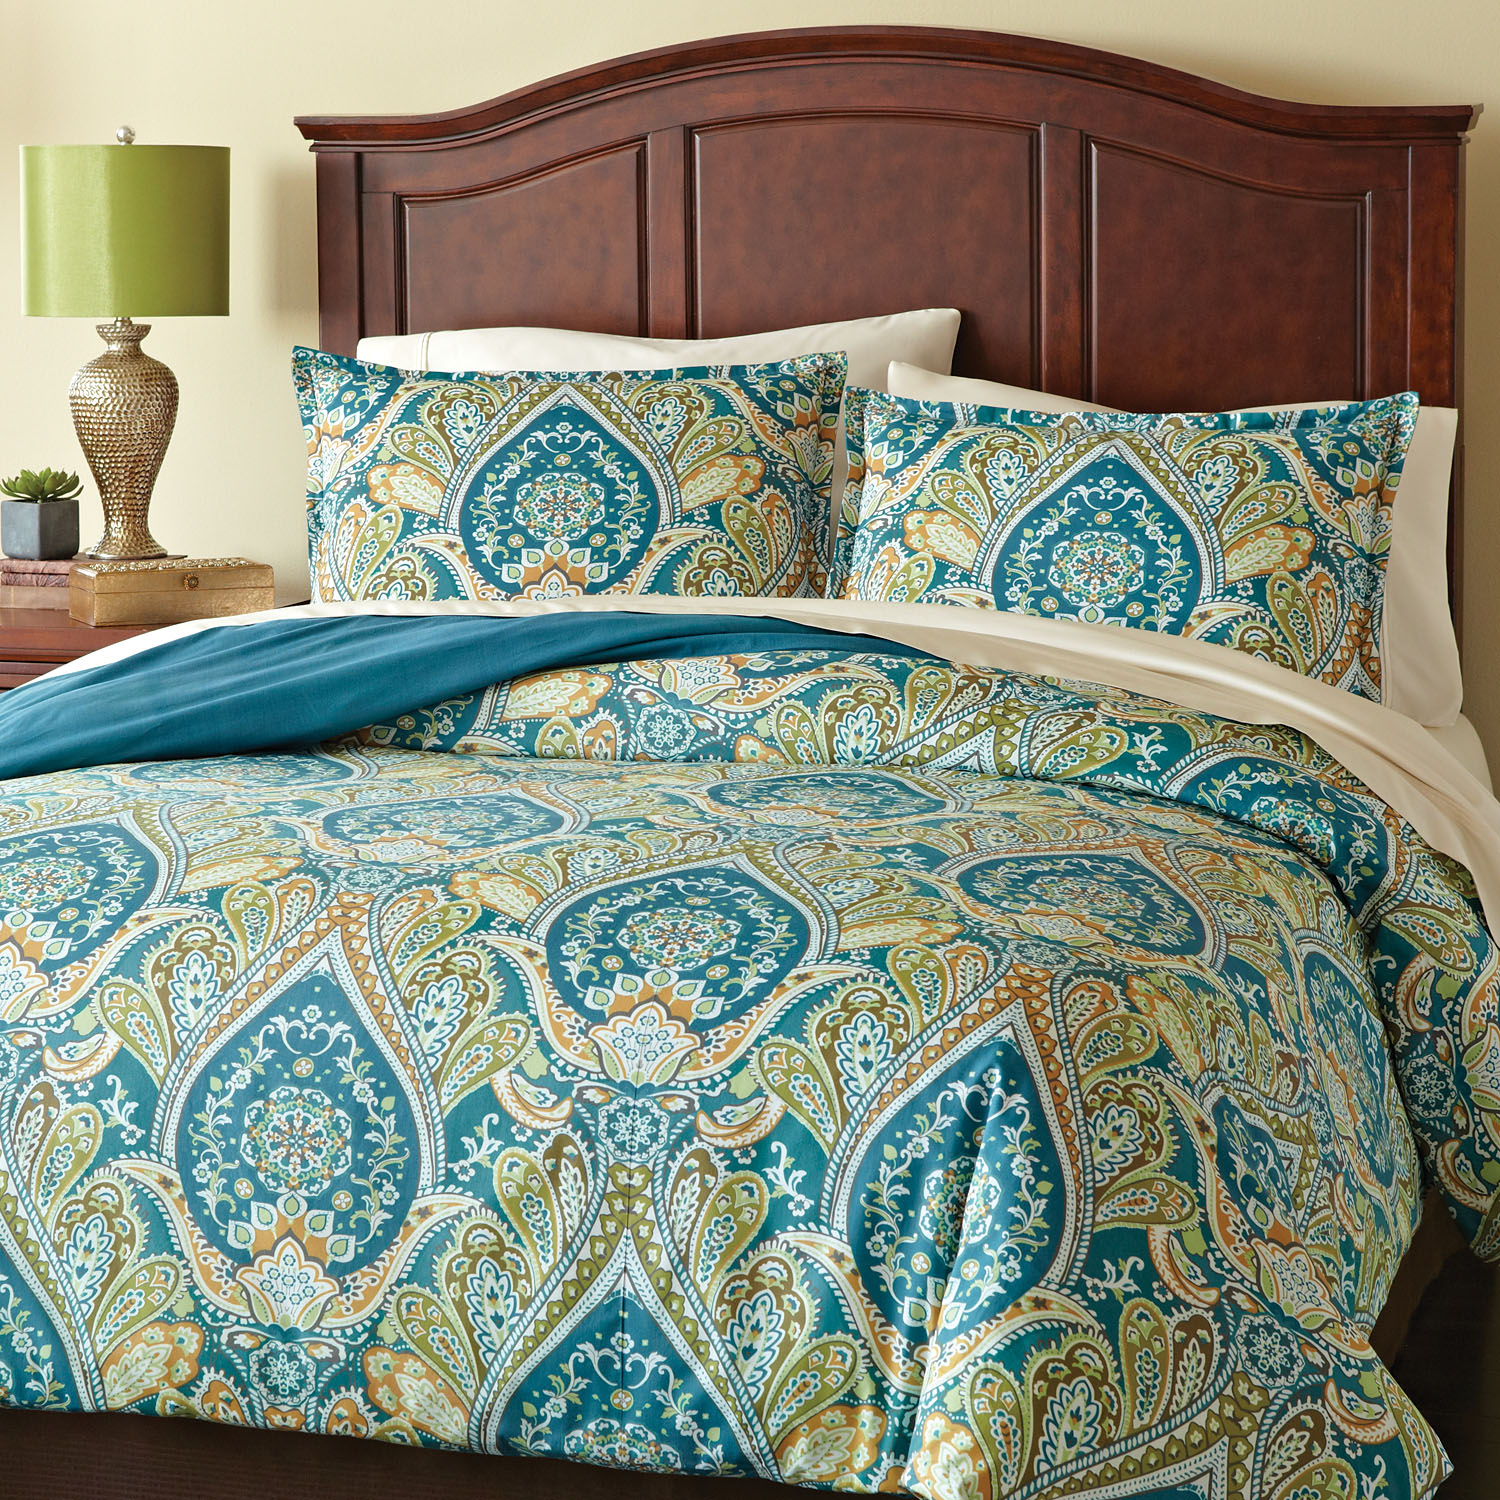 Blue and green quilt